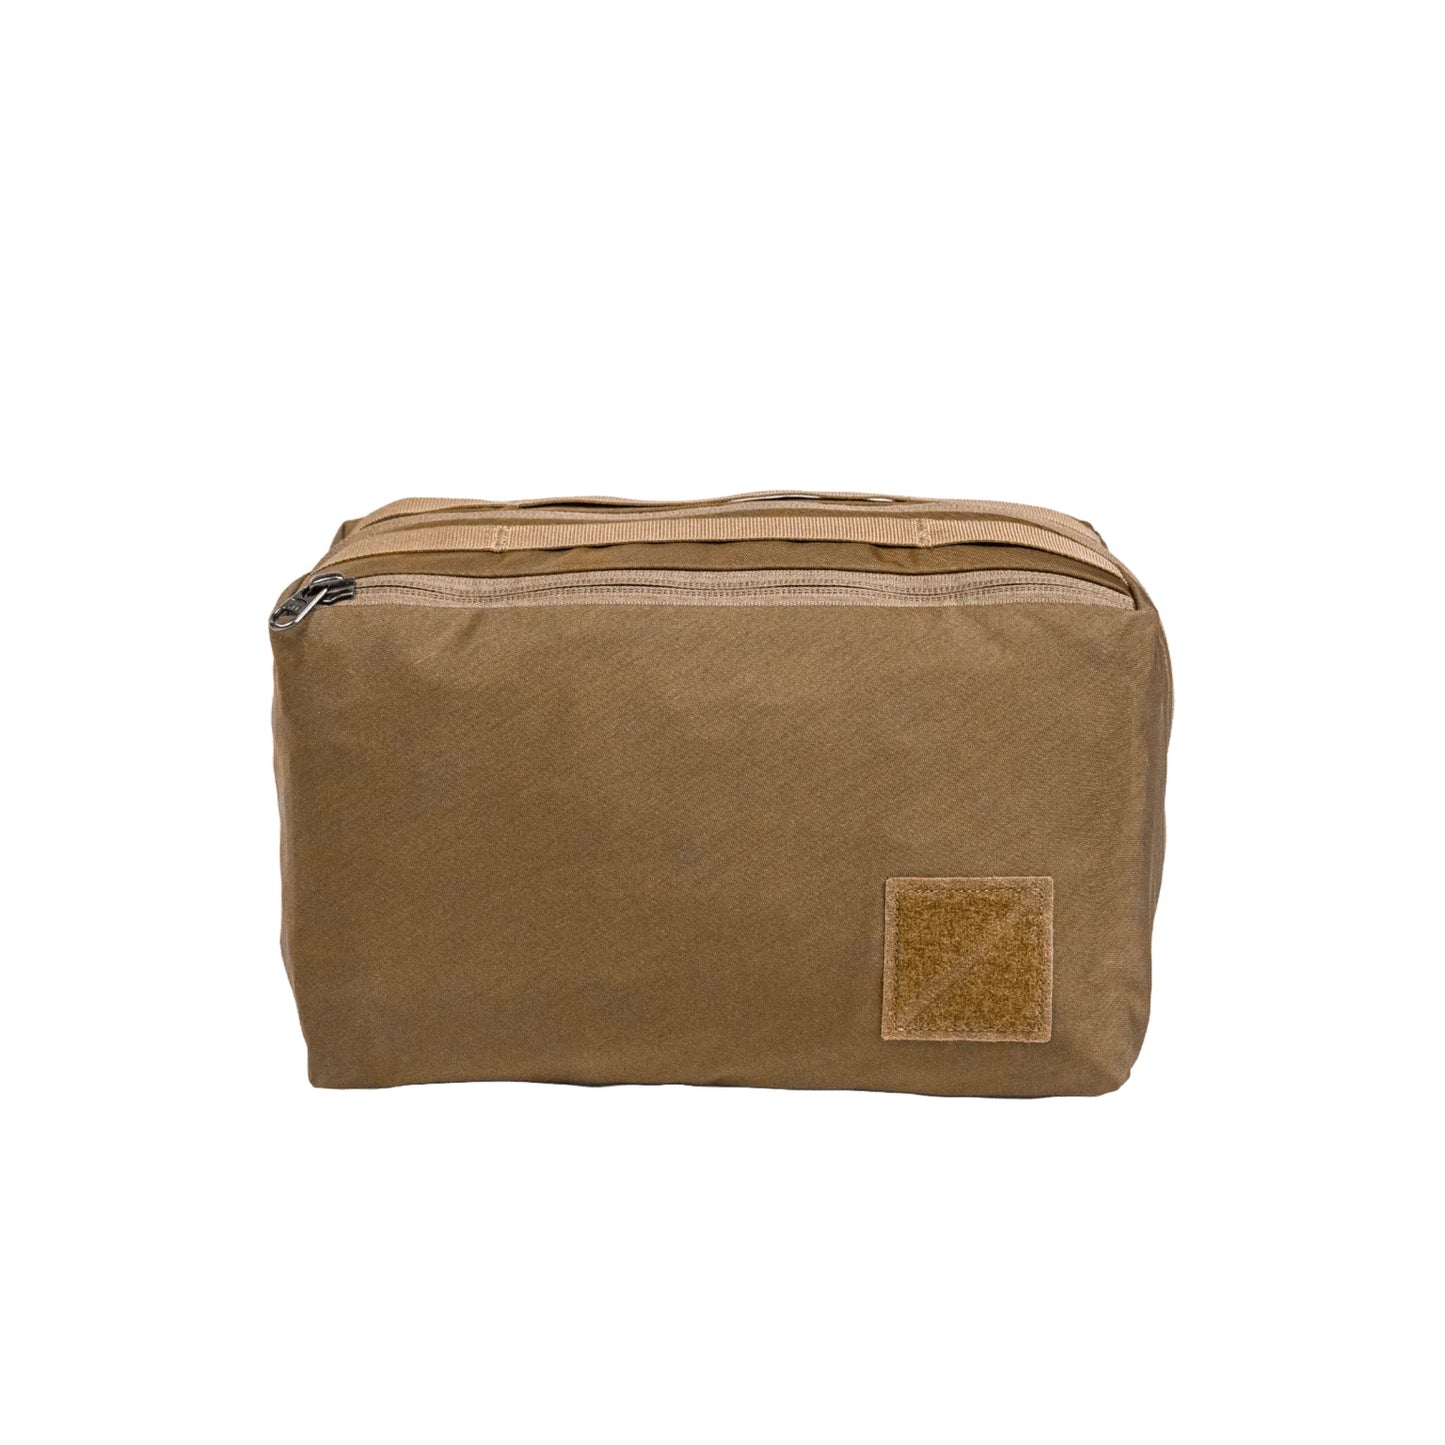 Evergoods - Transit Packing Cube 8L